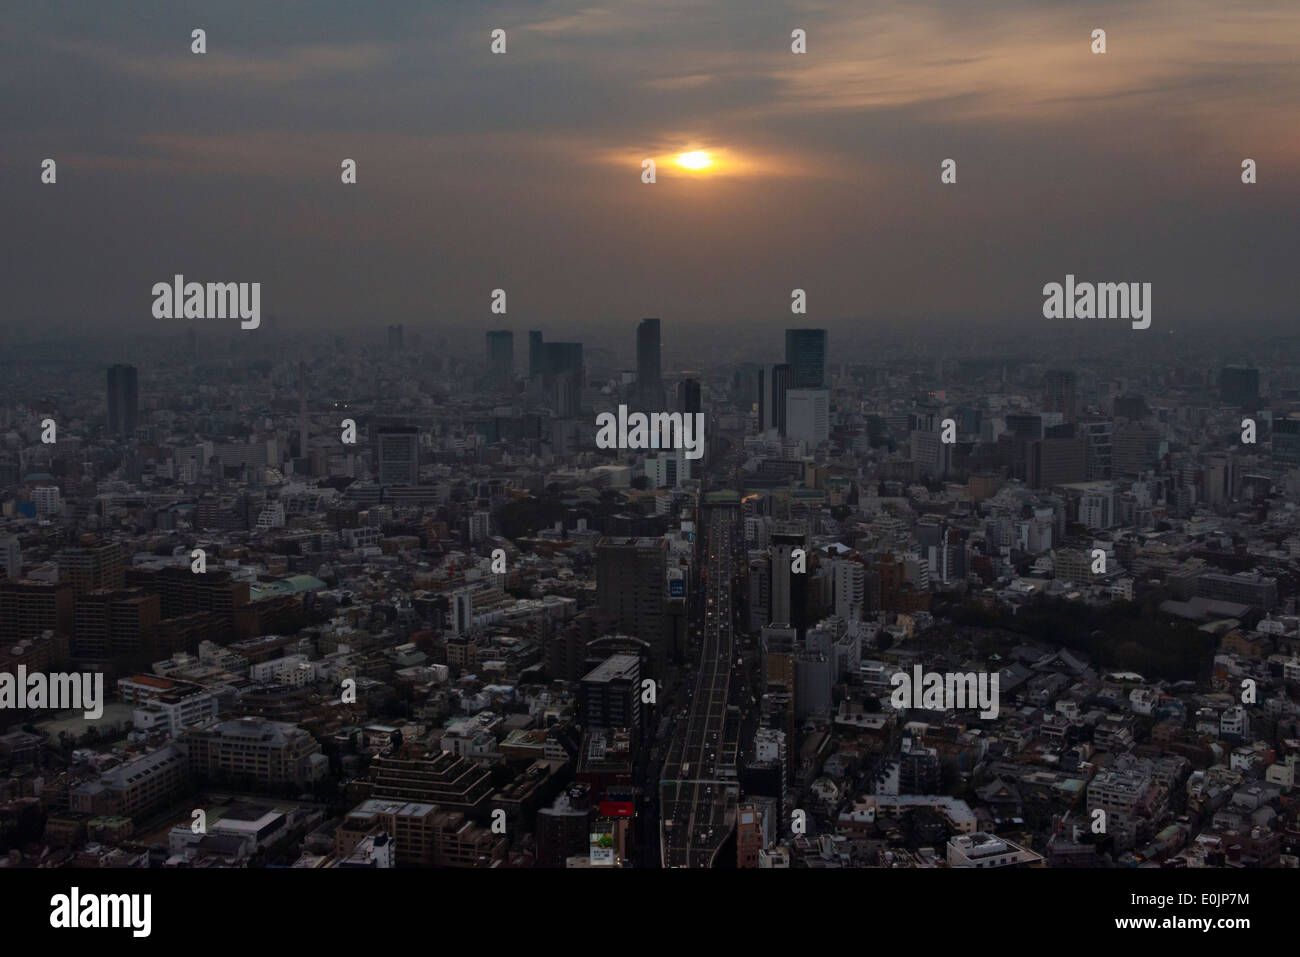 Aerial view of downtown high rises at dusk, Tokyo, Japan Stock Photo